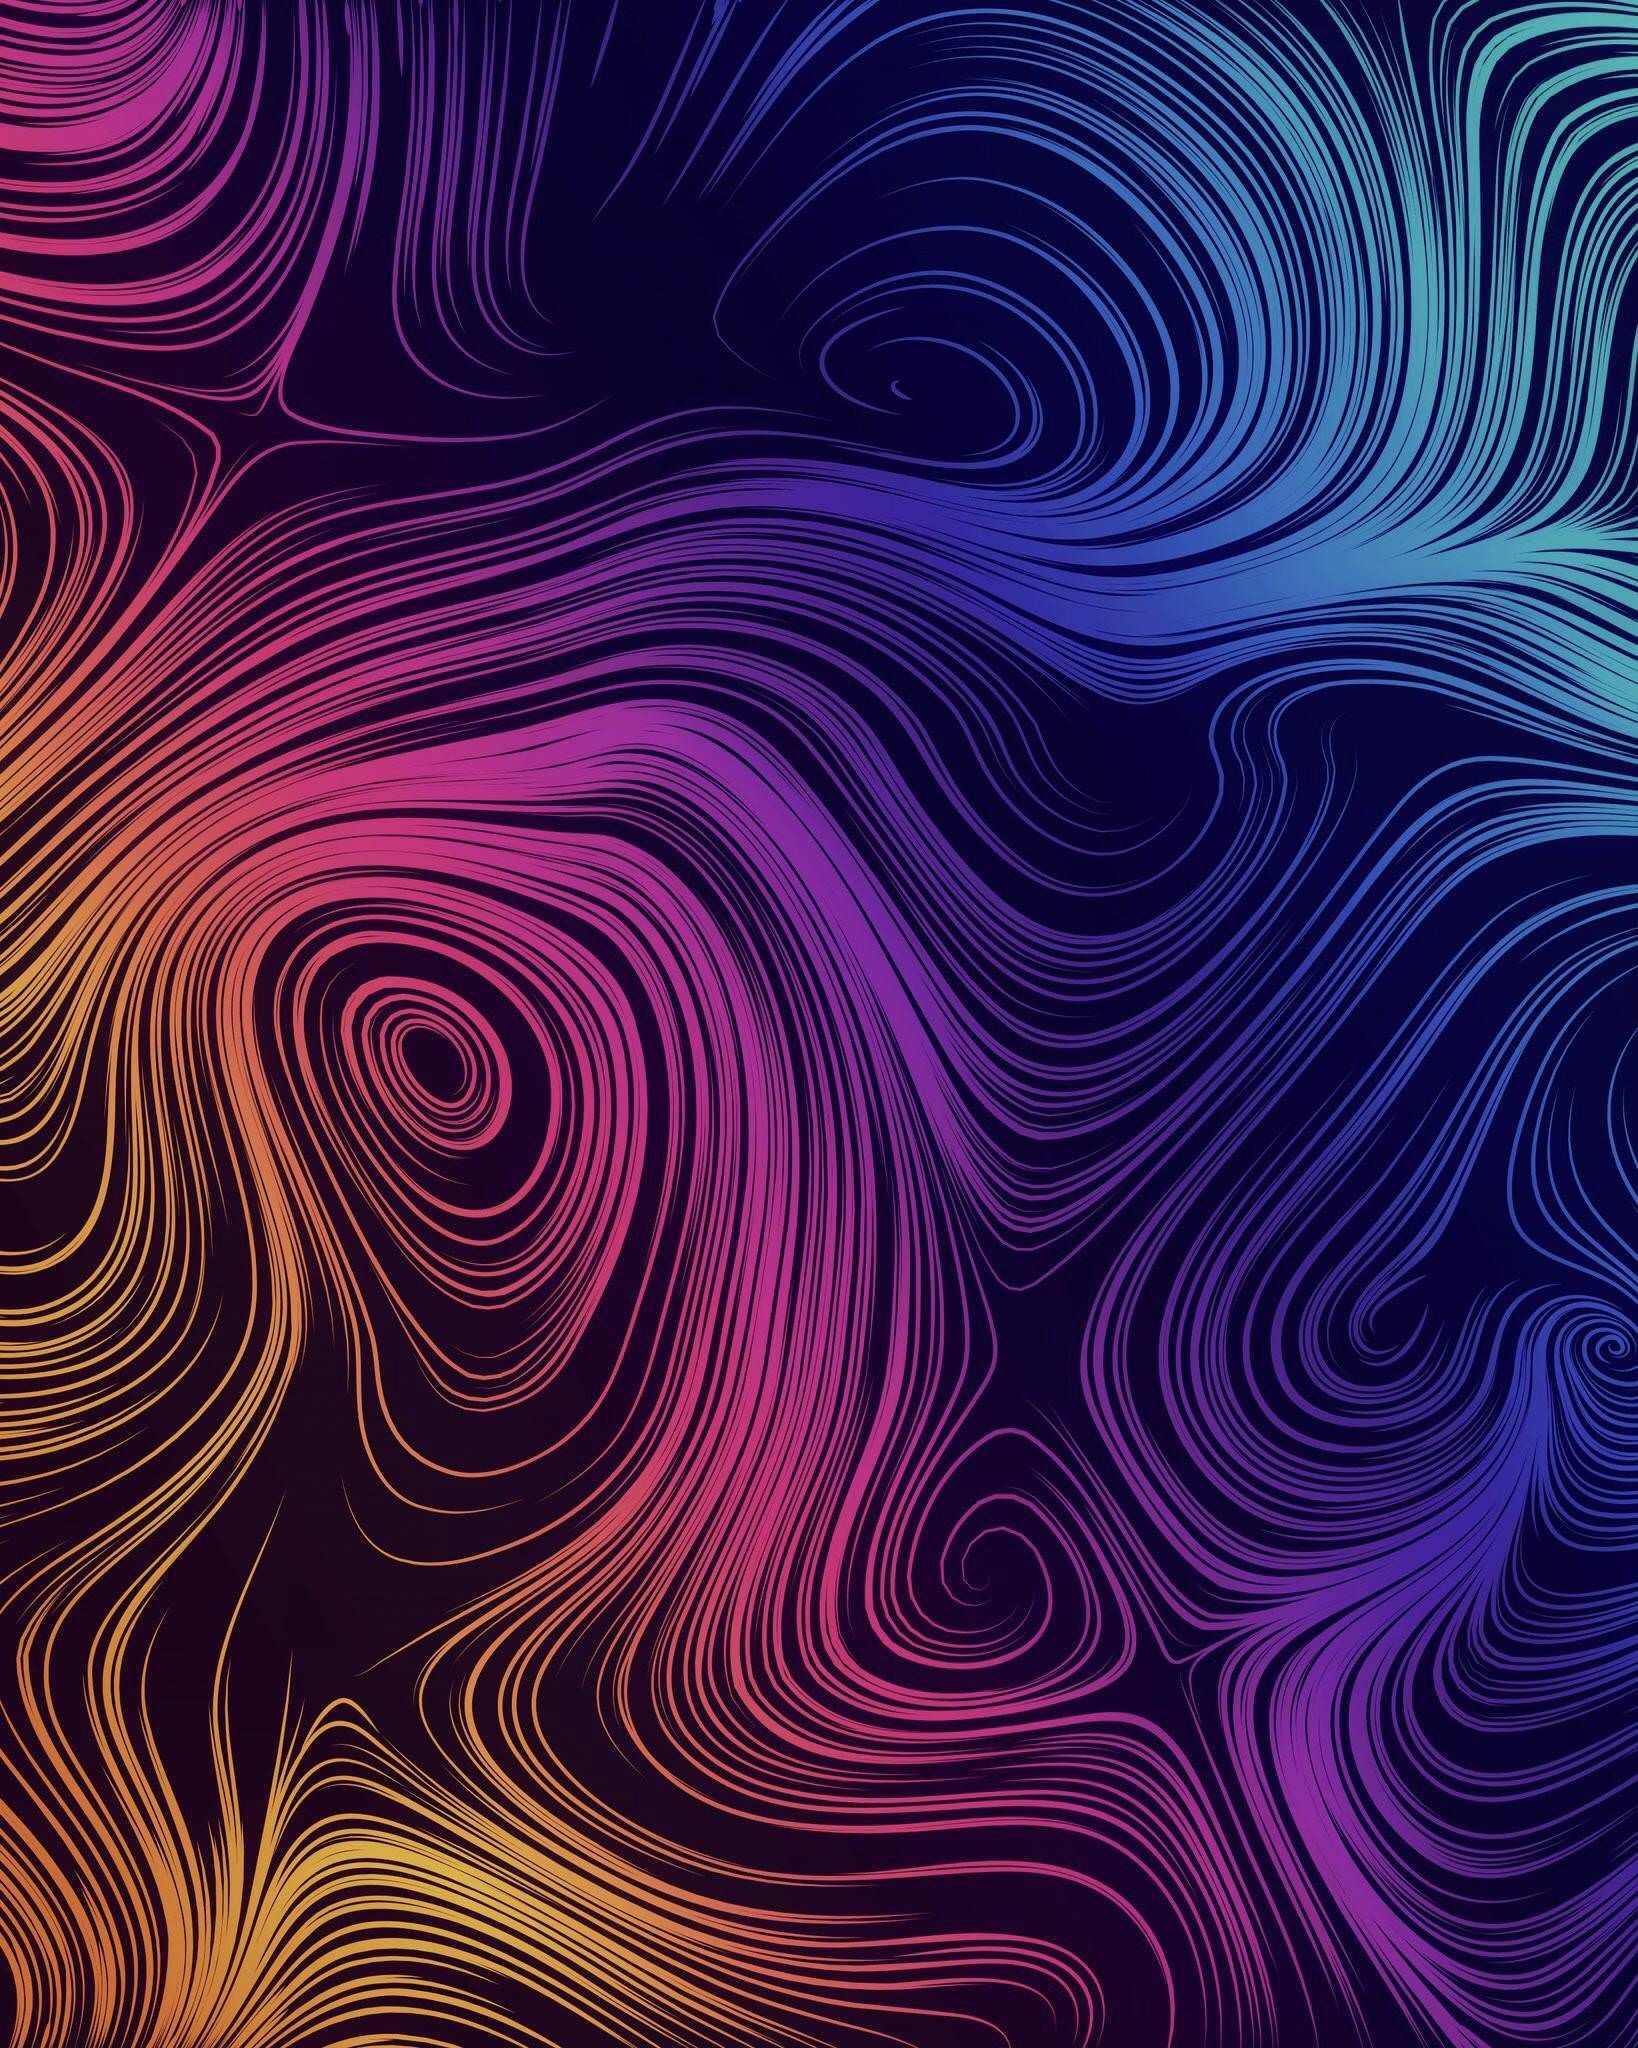 1638x2048 Is this the Galaxy S9 wallpaper from MKBHD? Download at: http://